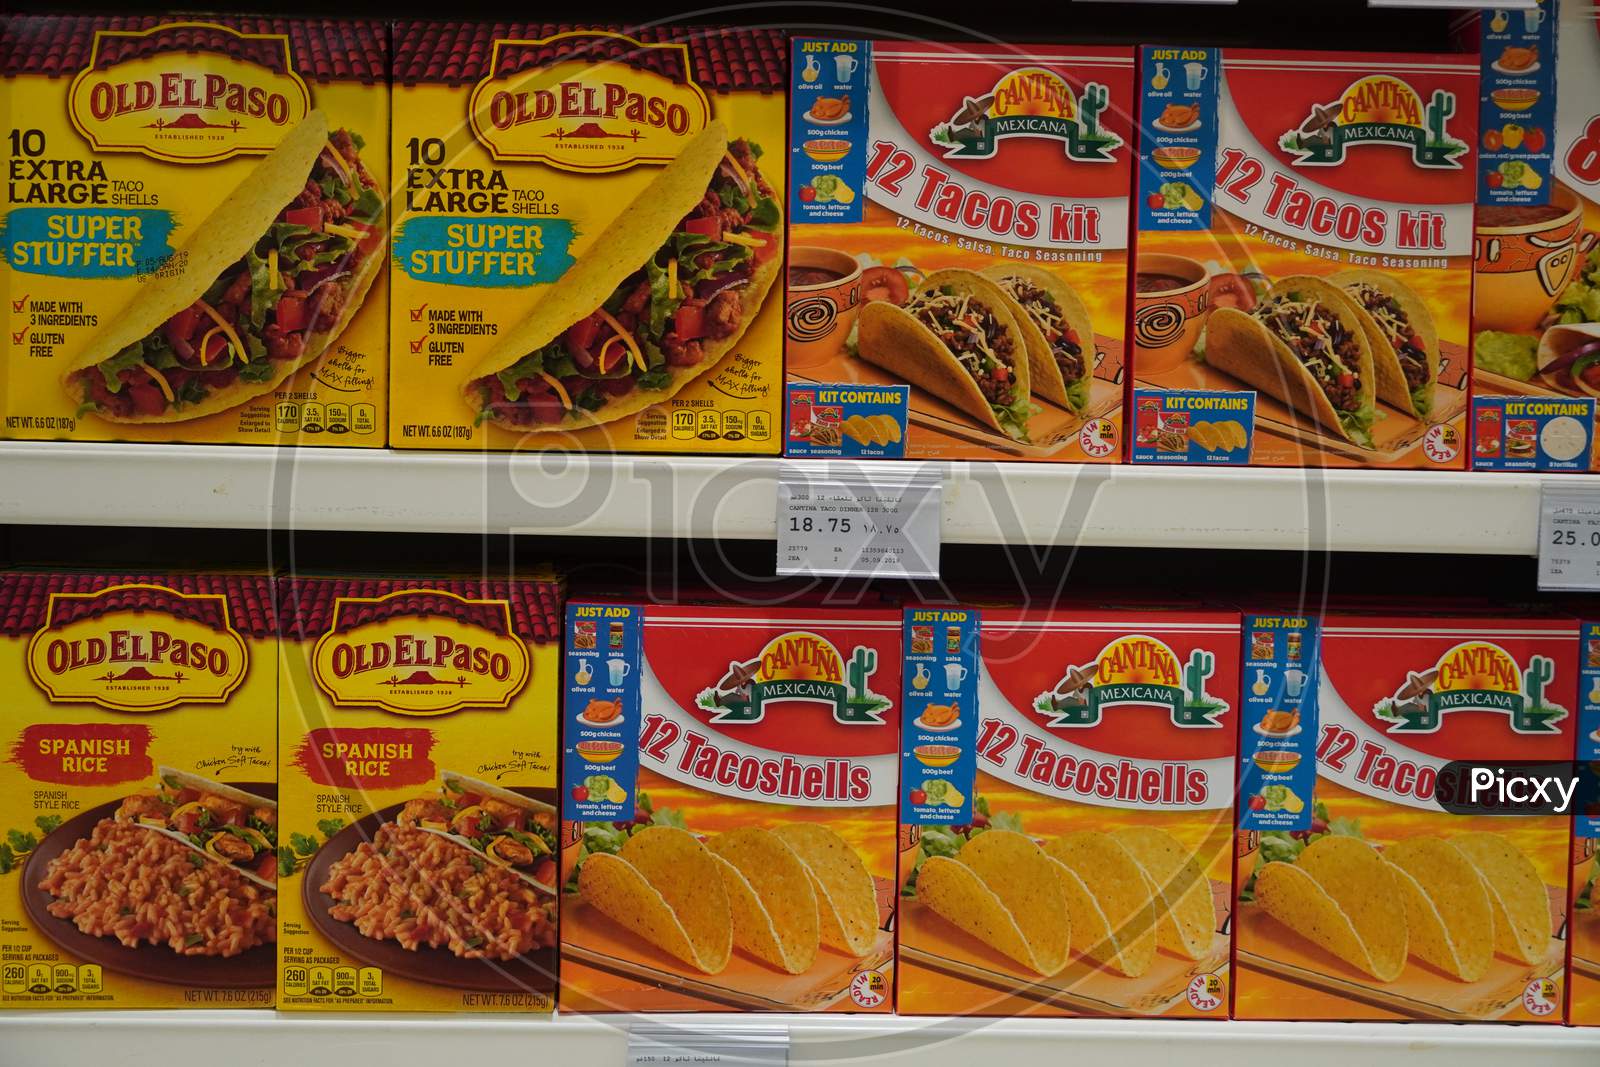 Assorted A Packed Of Taco Shells Display For Sale In The Supermarket Shelves. Also Present Salsa Bottles. Hard Shell Corn Taco Shells Boxes.